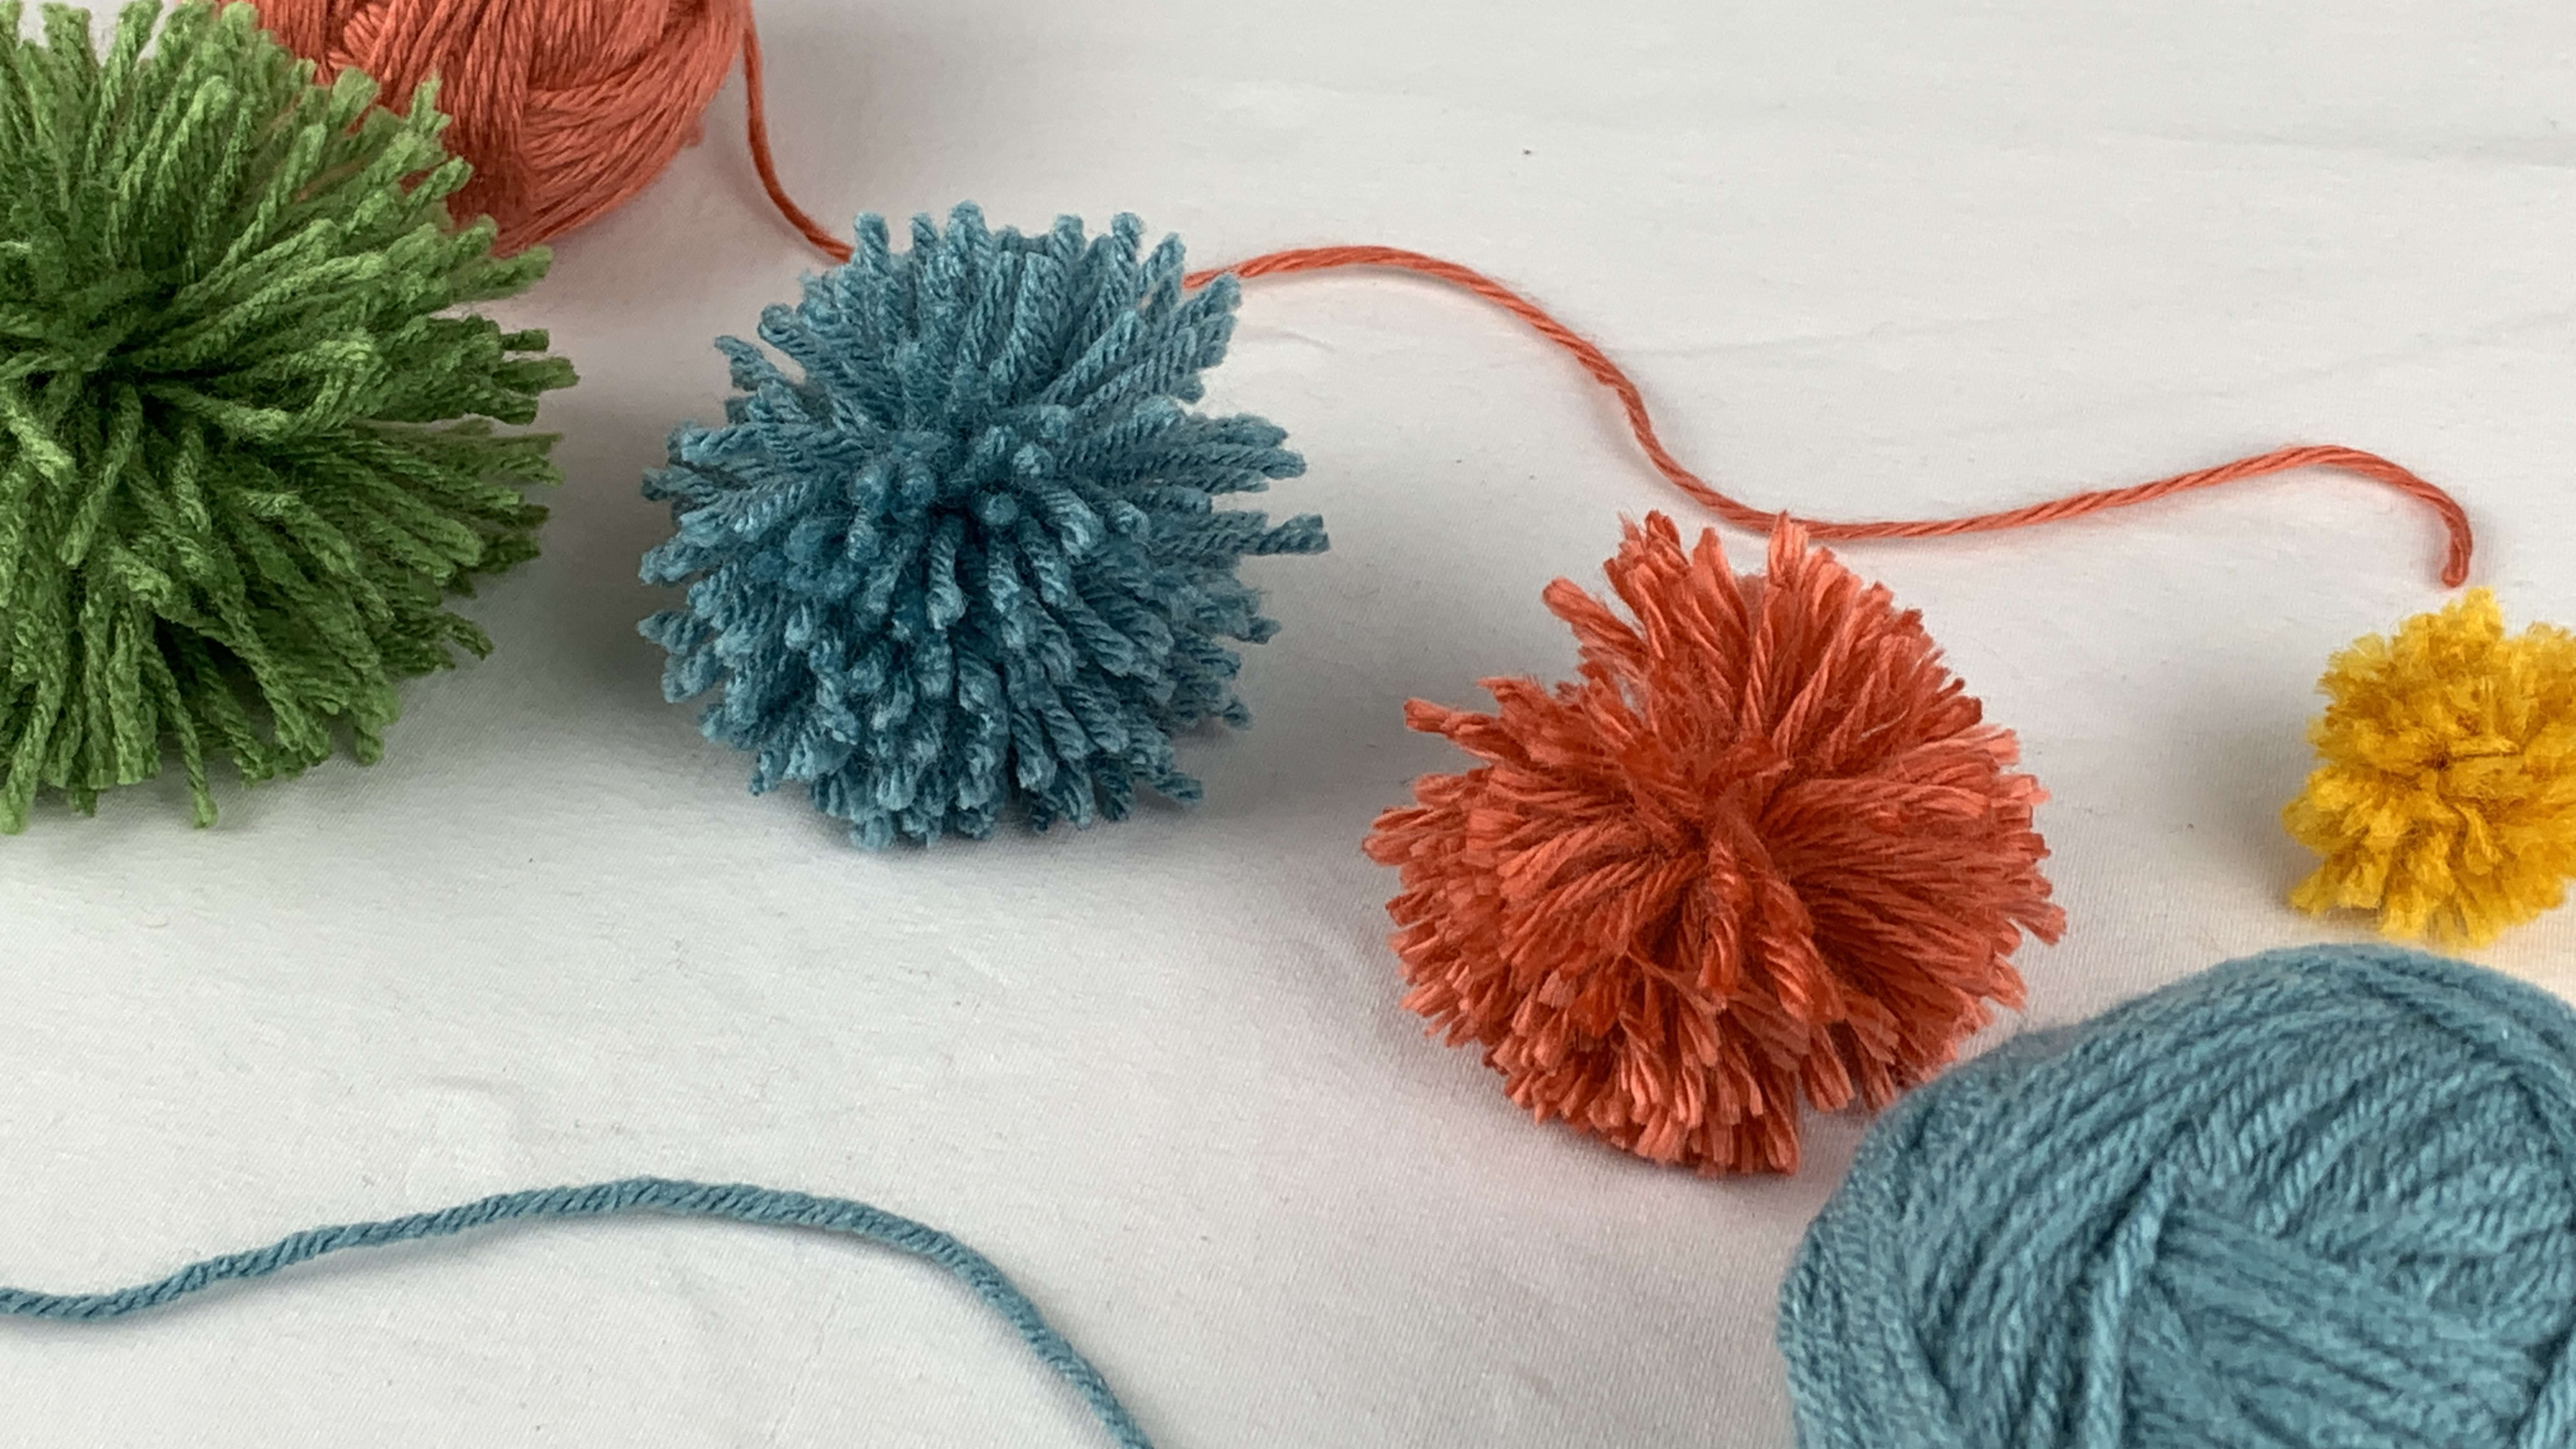 How To Make Pom-Poms - Chaotically Yours